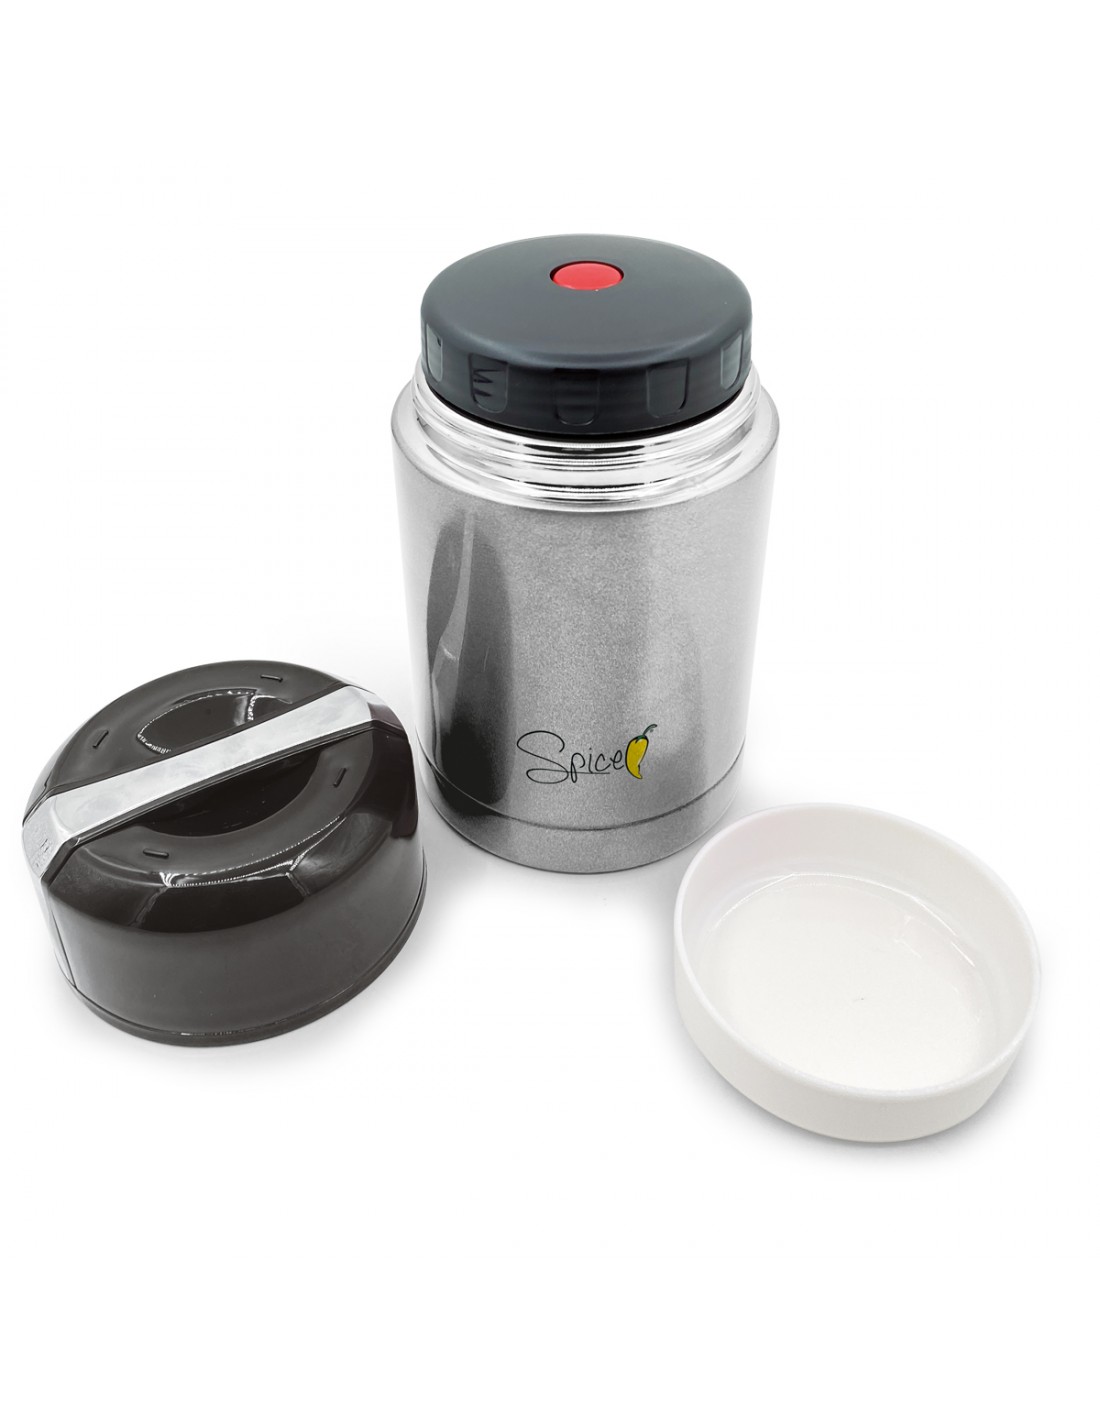 Thermo for Hot Food, Premium Stainless Steel Insulated Food Jar Leak P